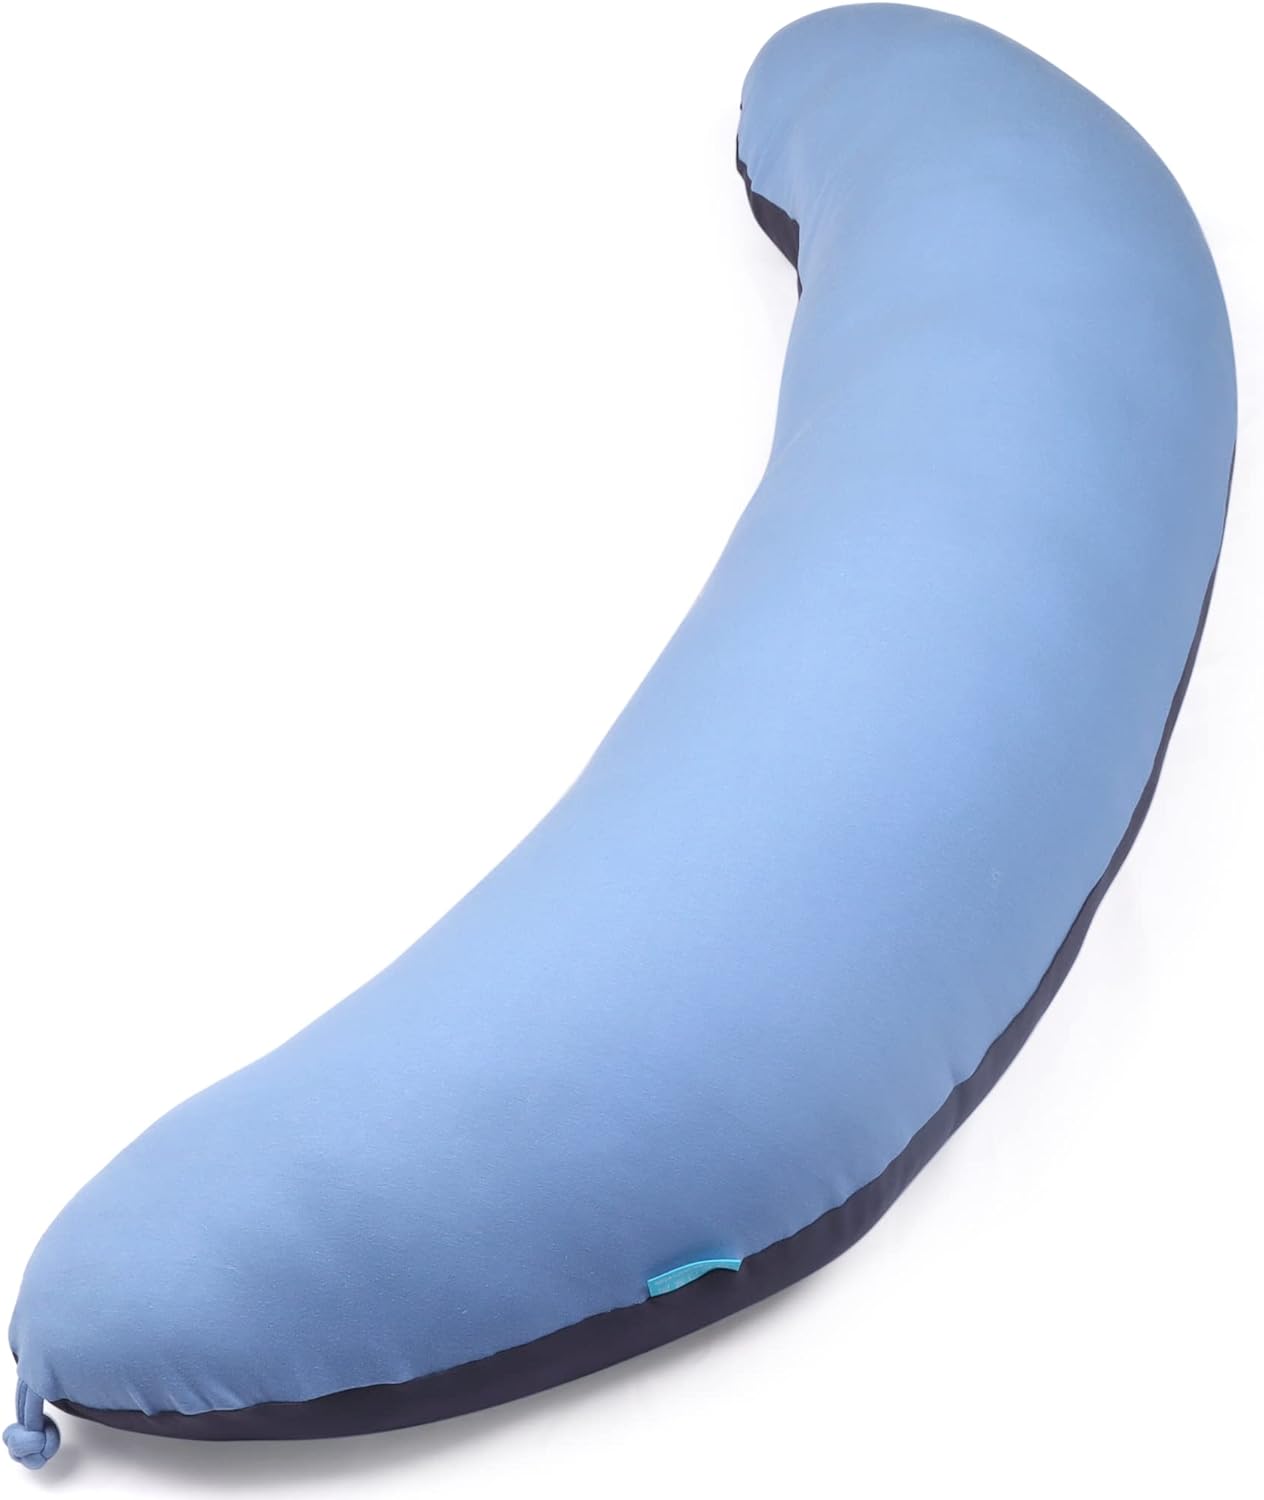 BYRIVER C Shaped Full Body Pillow Review